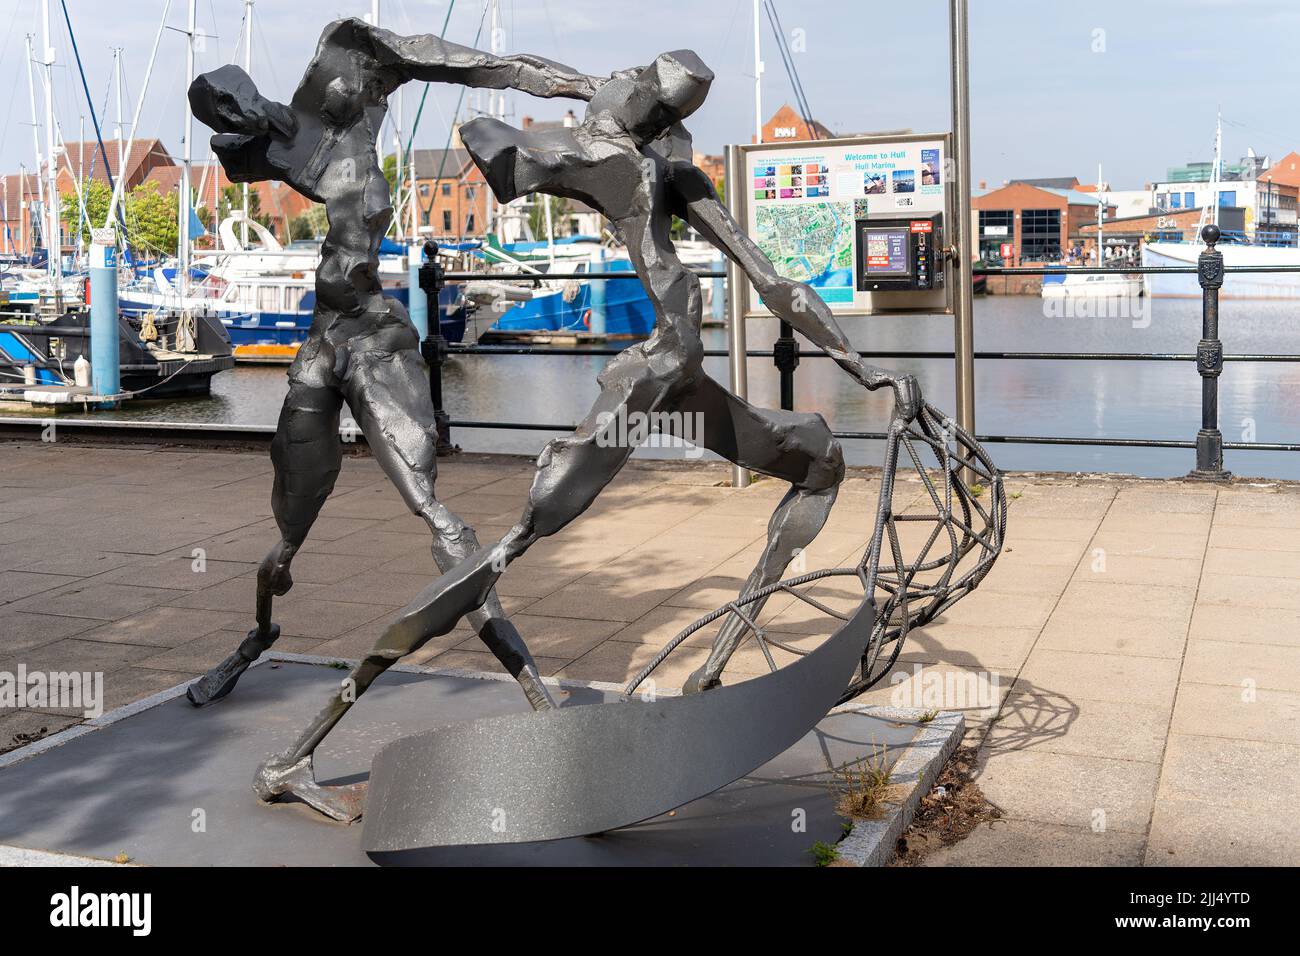 KINGSTON UPON HULL,  YORKSHIRE, UK - JULY 17: Sculpture of two fishermen catching fish with a net in Kingston upon Hull on July 17, 2022 Stock Photo